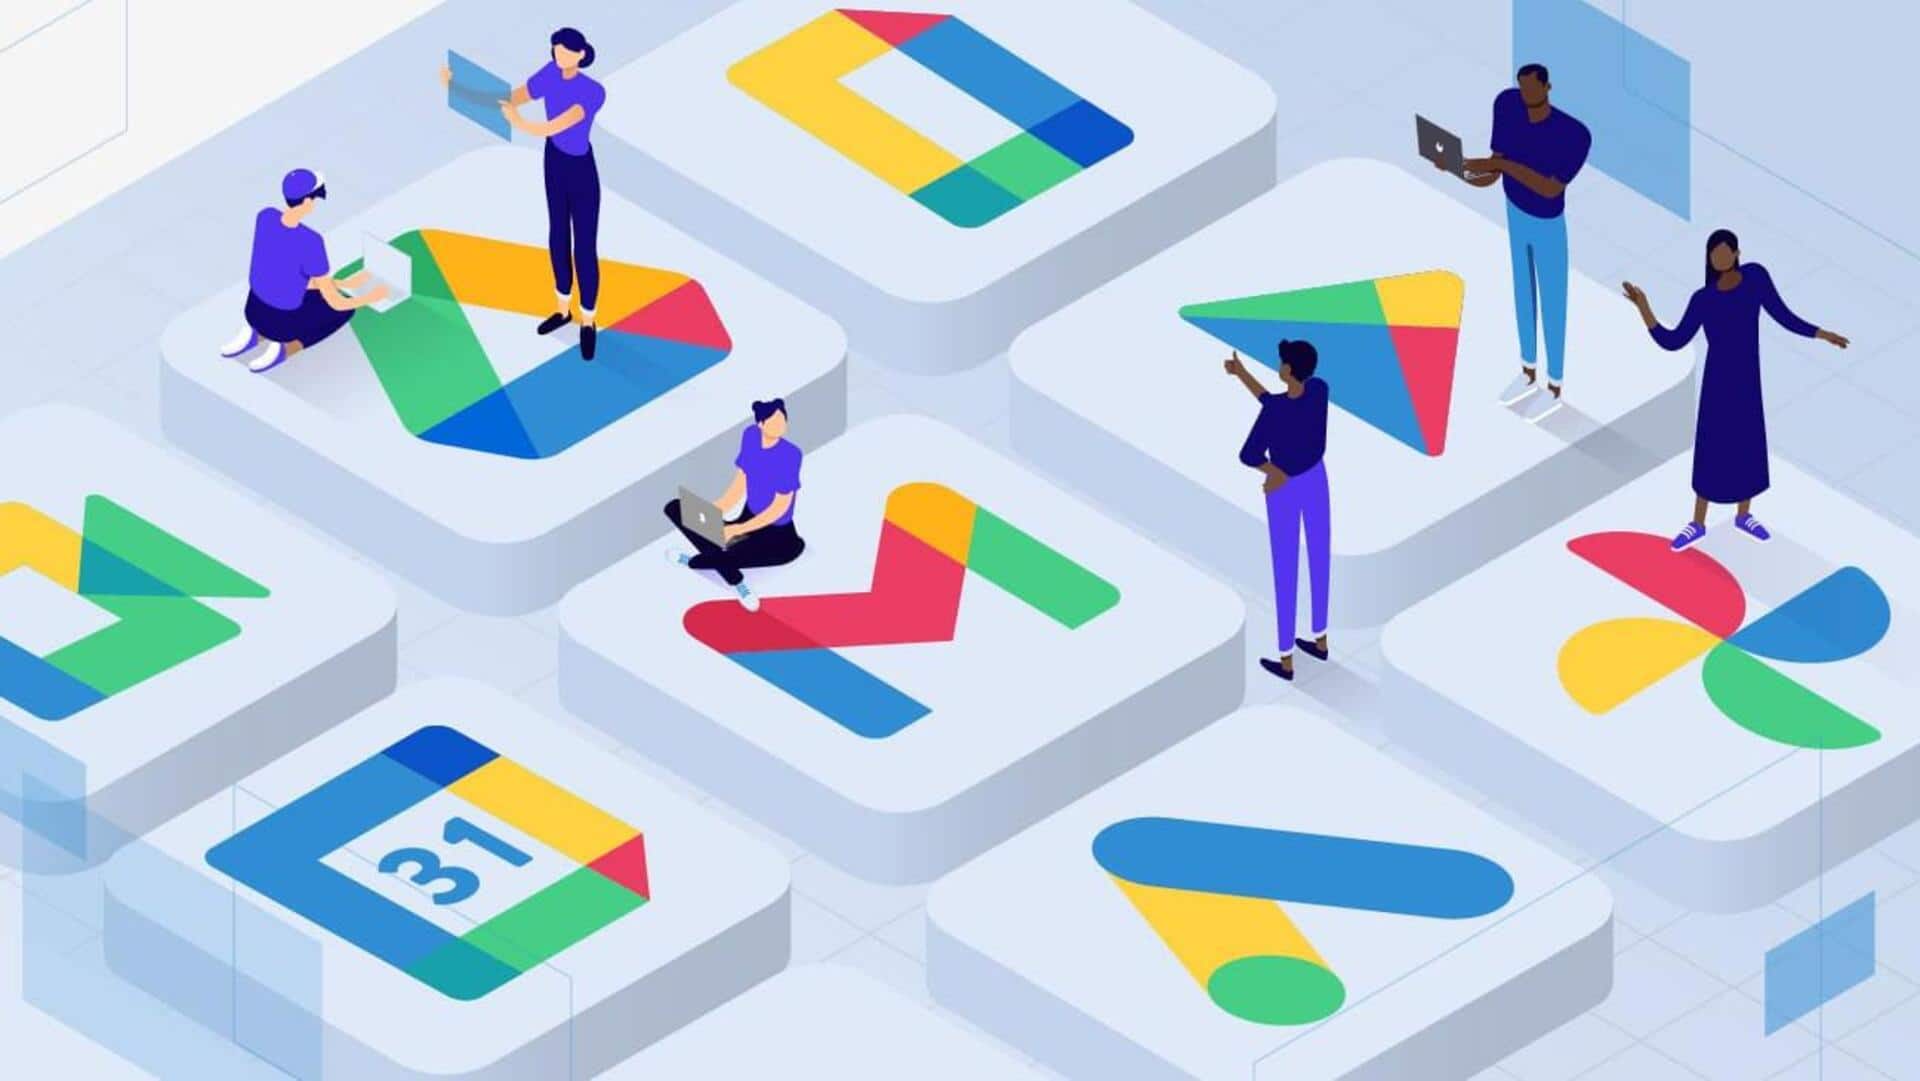 Google's latest updates improve sharing experience on Workspace apps